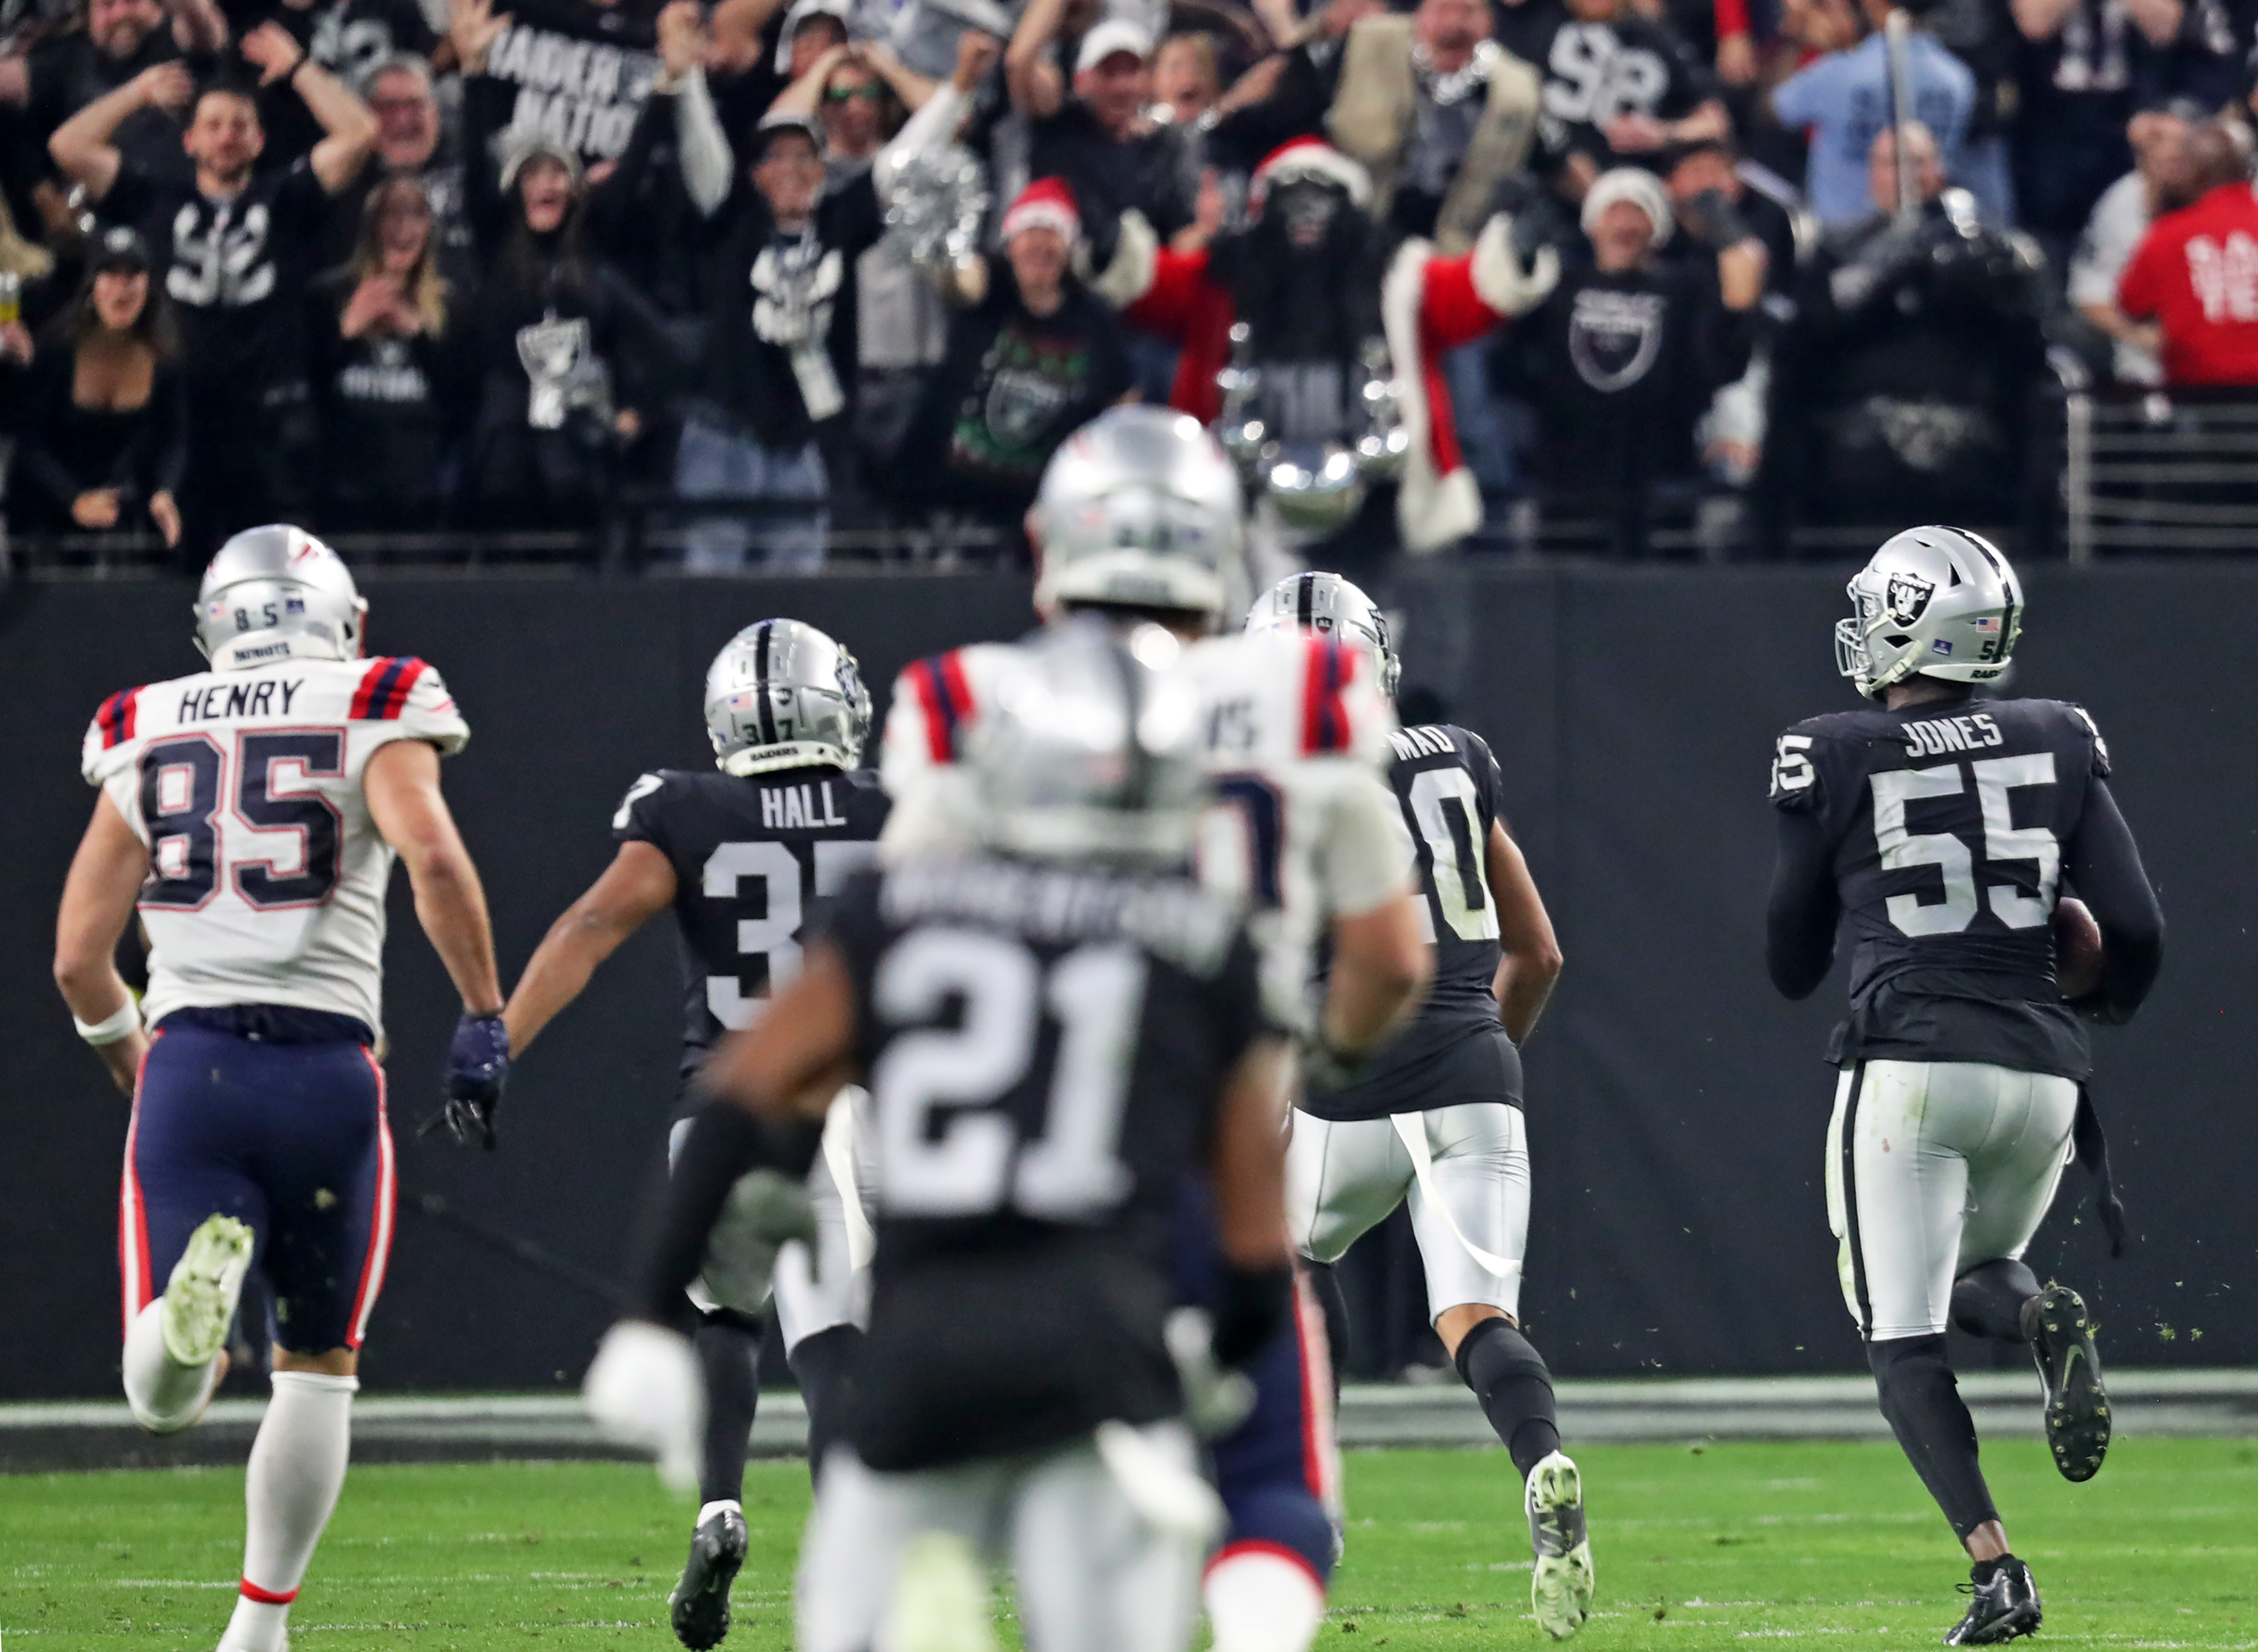 Patriots loss to Raiders was unfathomable, even as it was